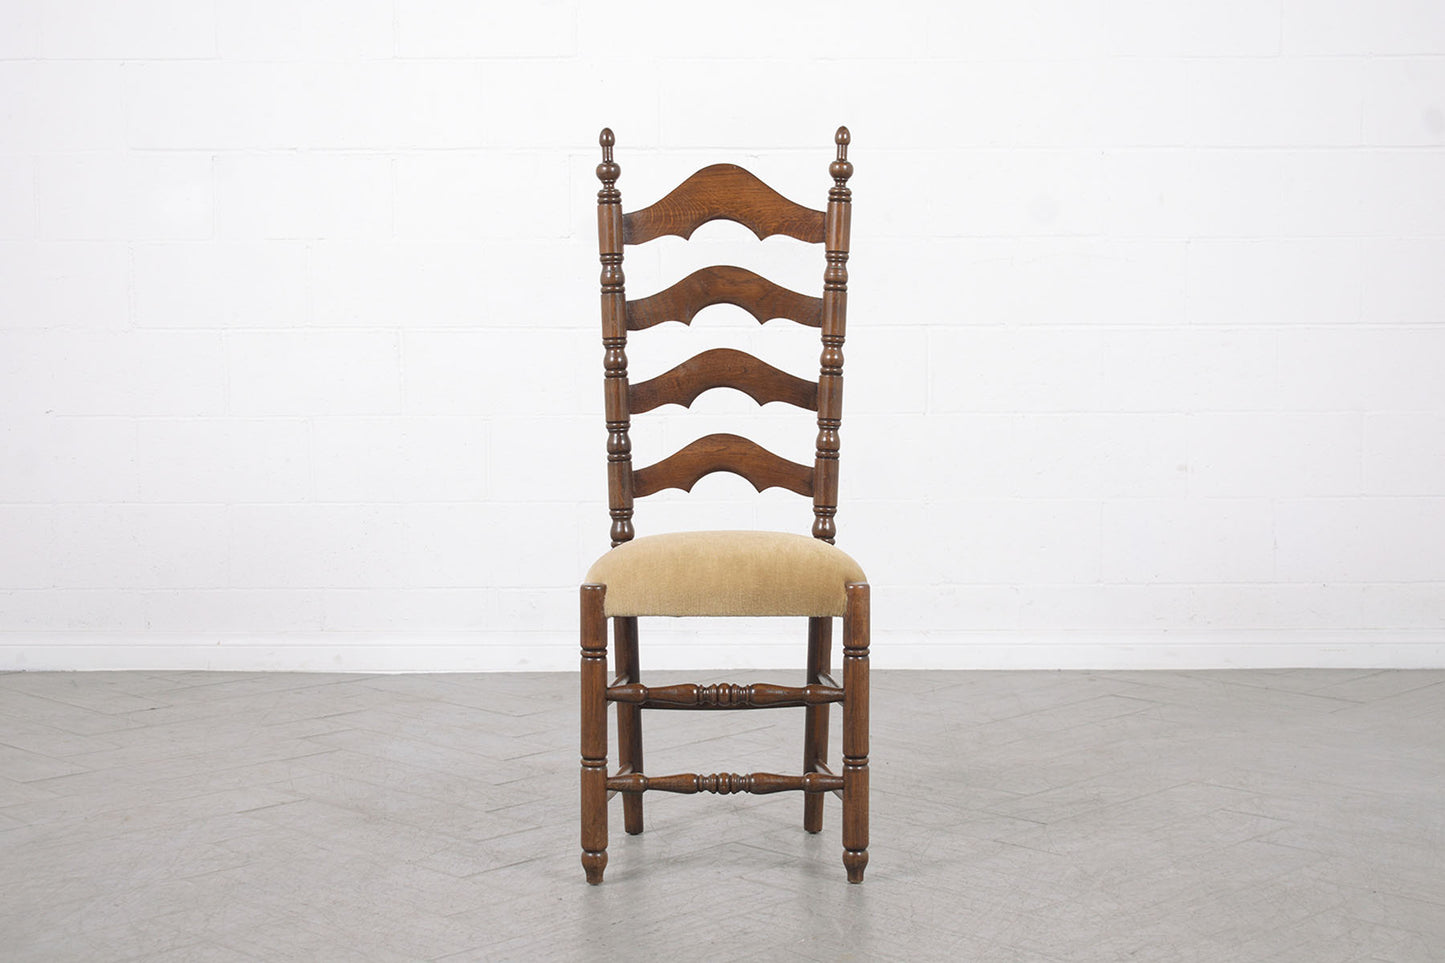 Set of Six 1900s French Provincial Dining Chairs